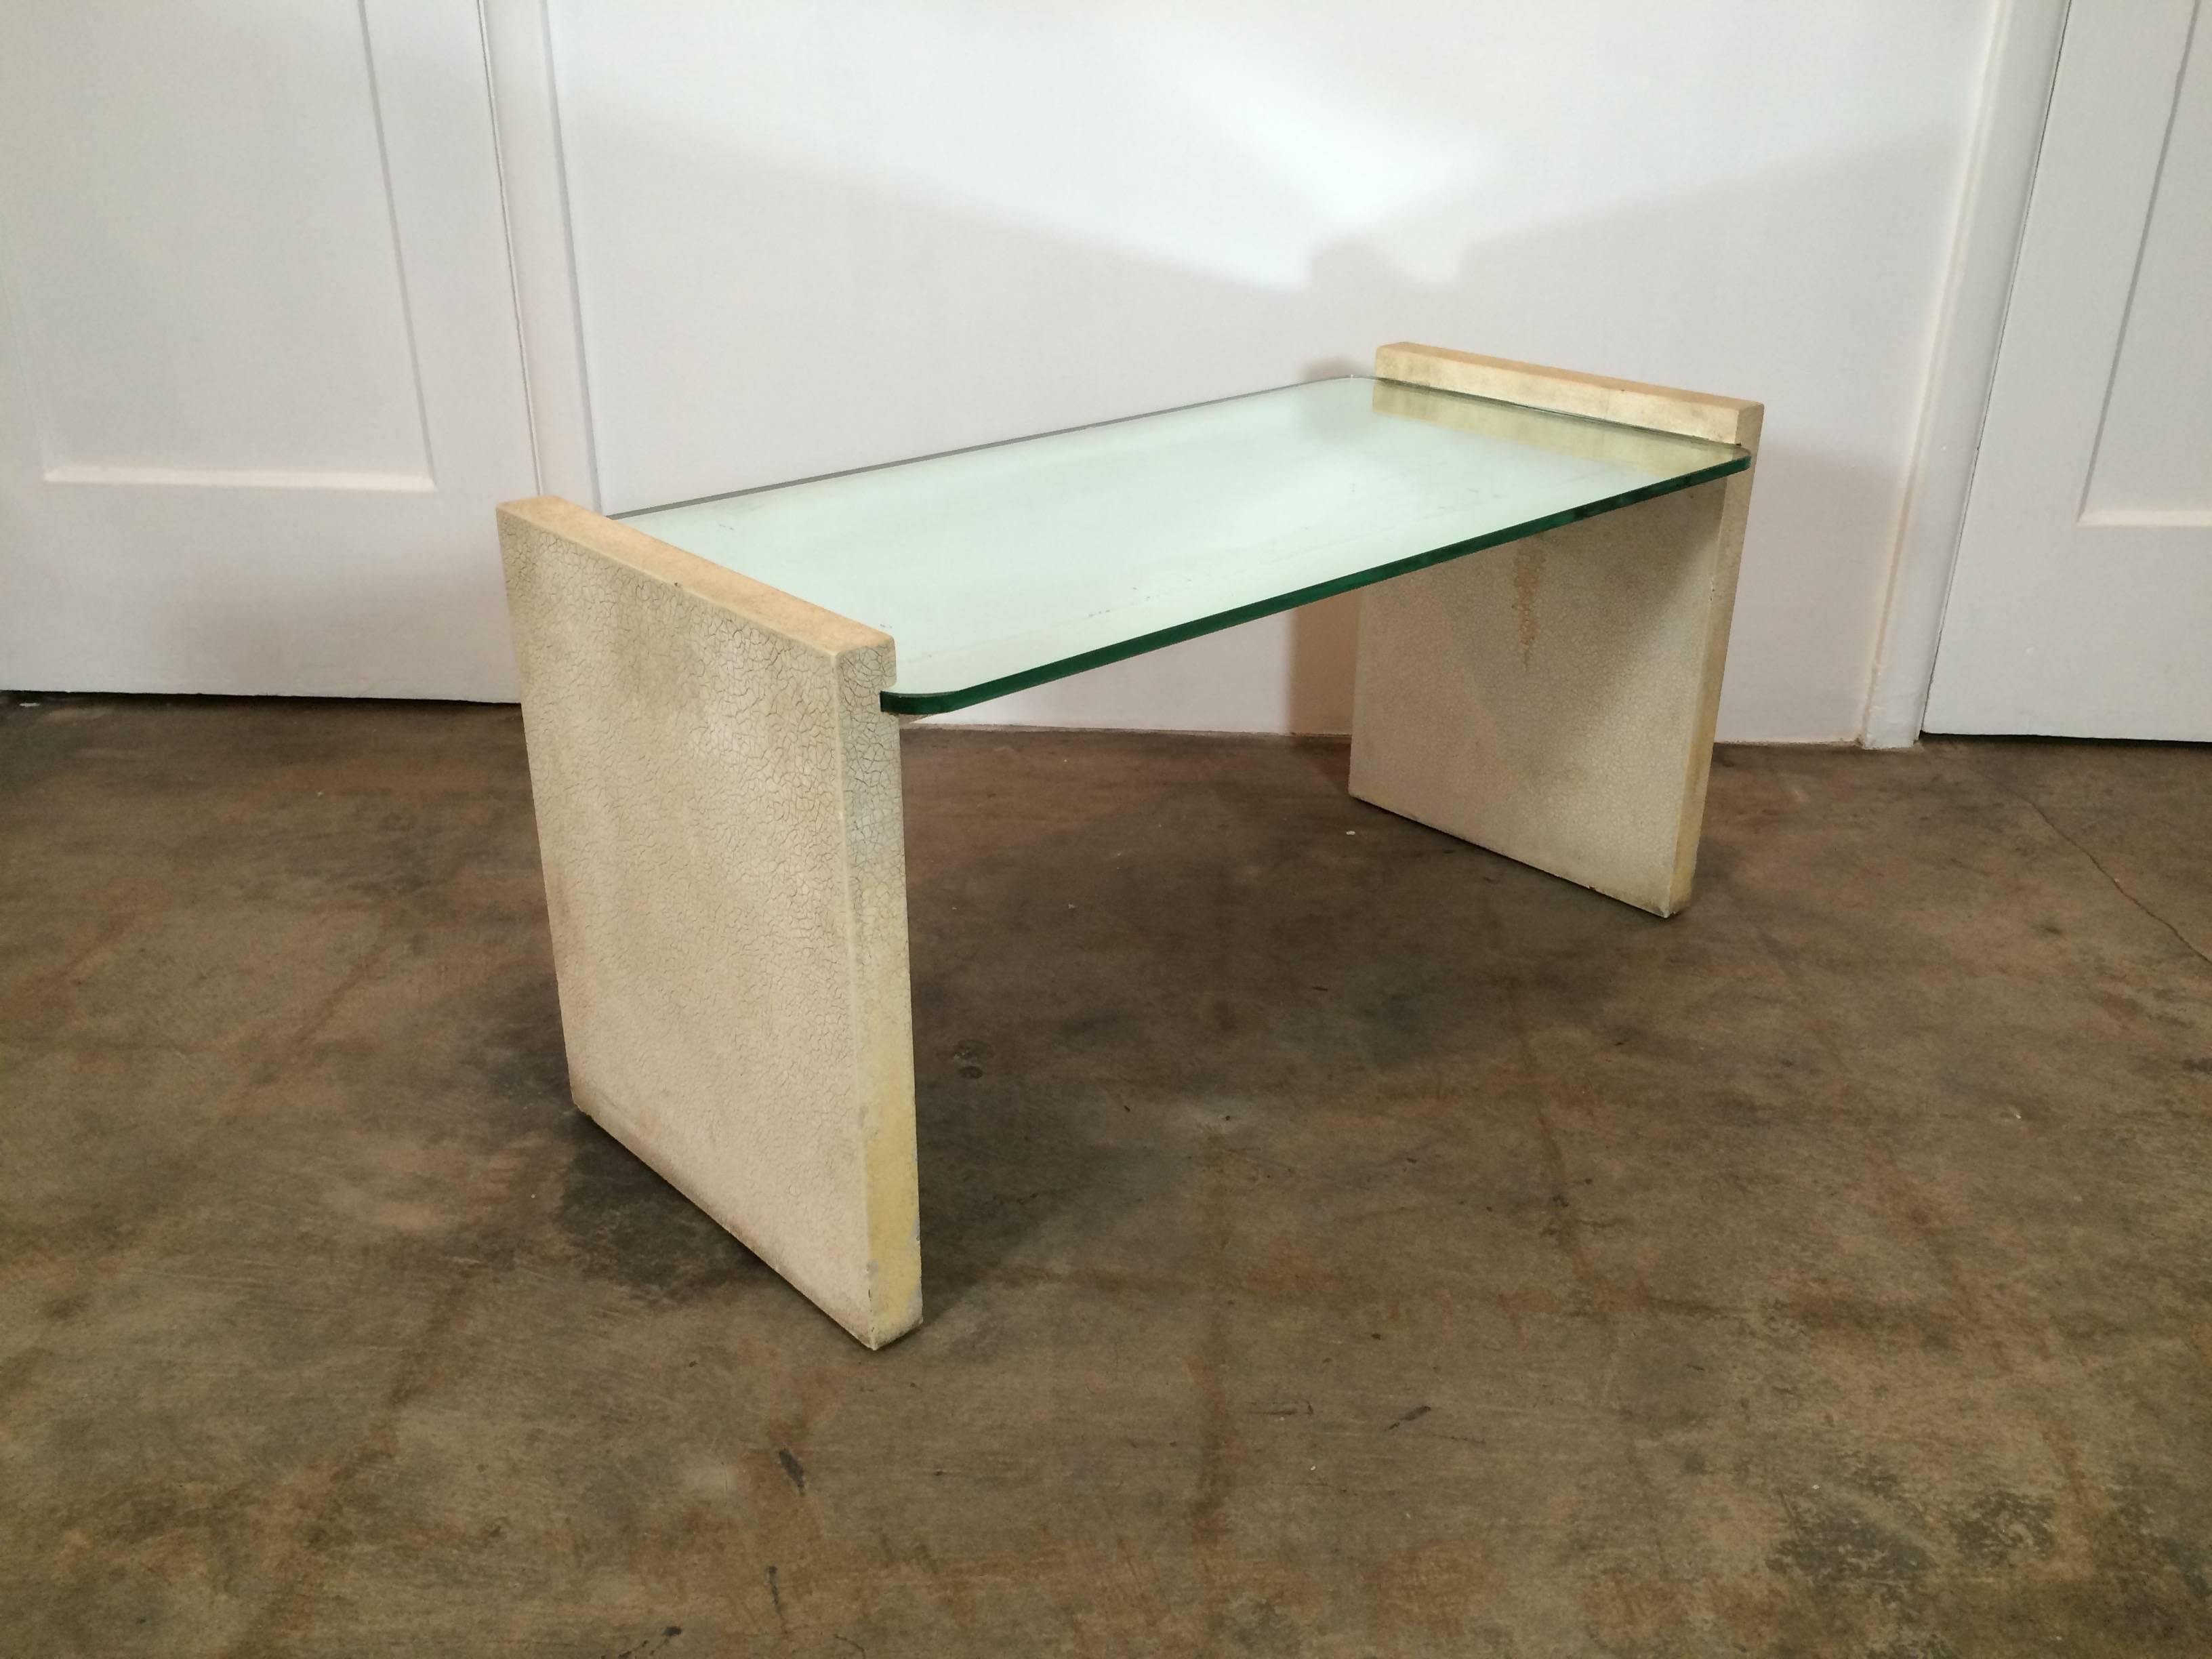 Paul Frankl coffee table from his studio, original crackle finish and mirrored top. This came from Frankl's personal studio, so this was not a production piece. Complete in it's original condition, the table does have some minor chips and losses,